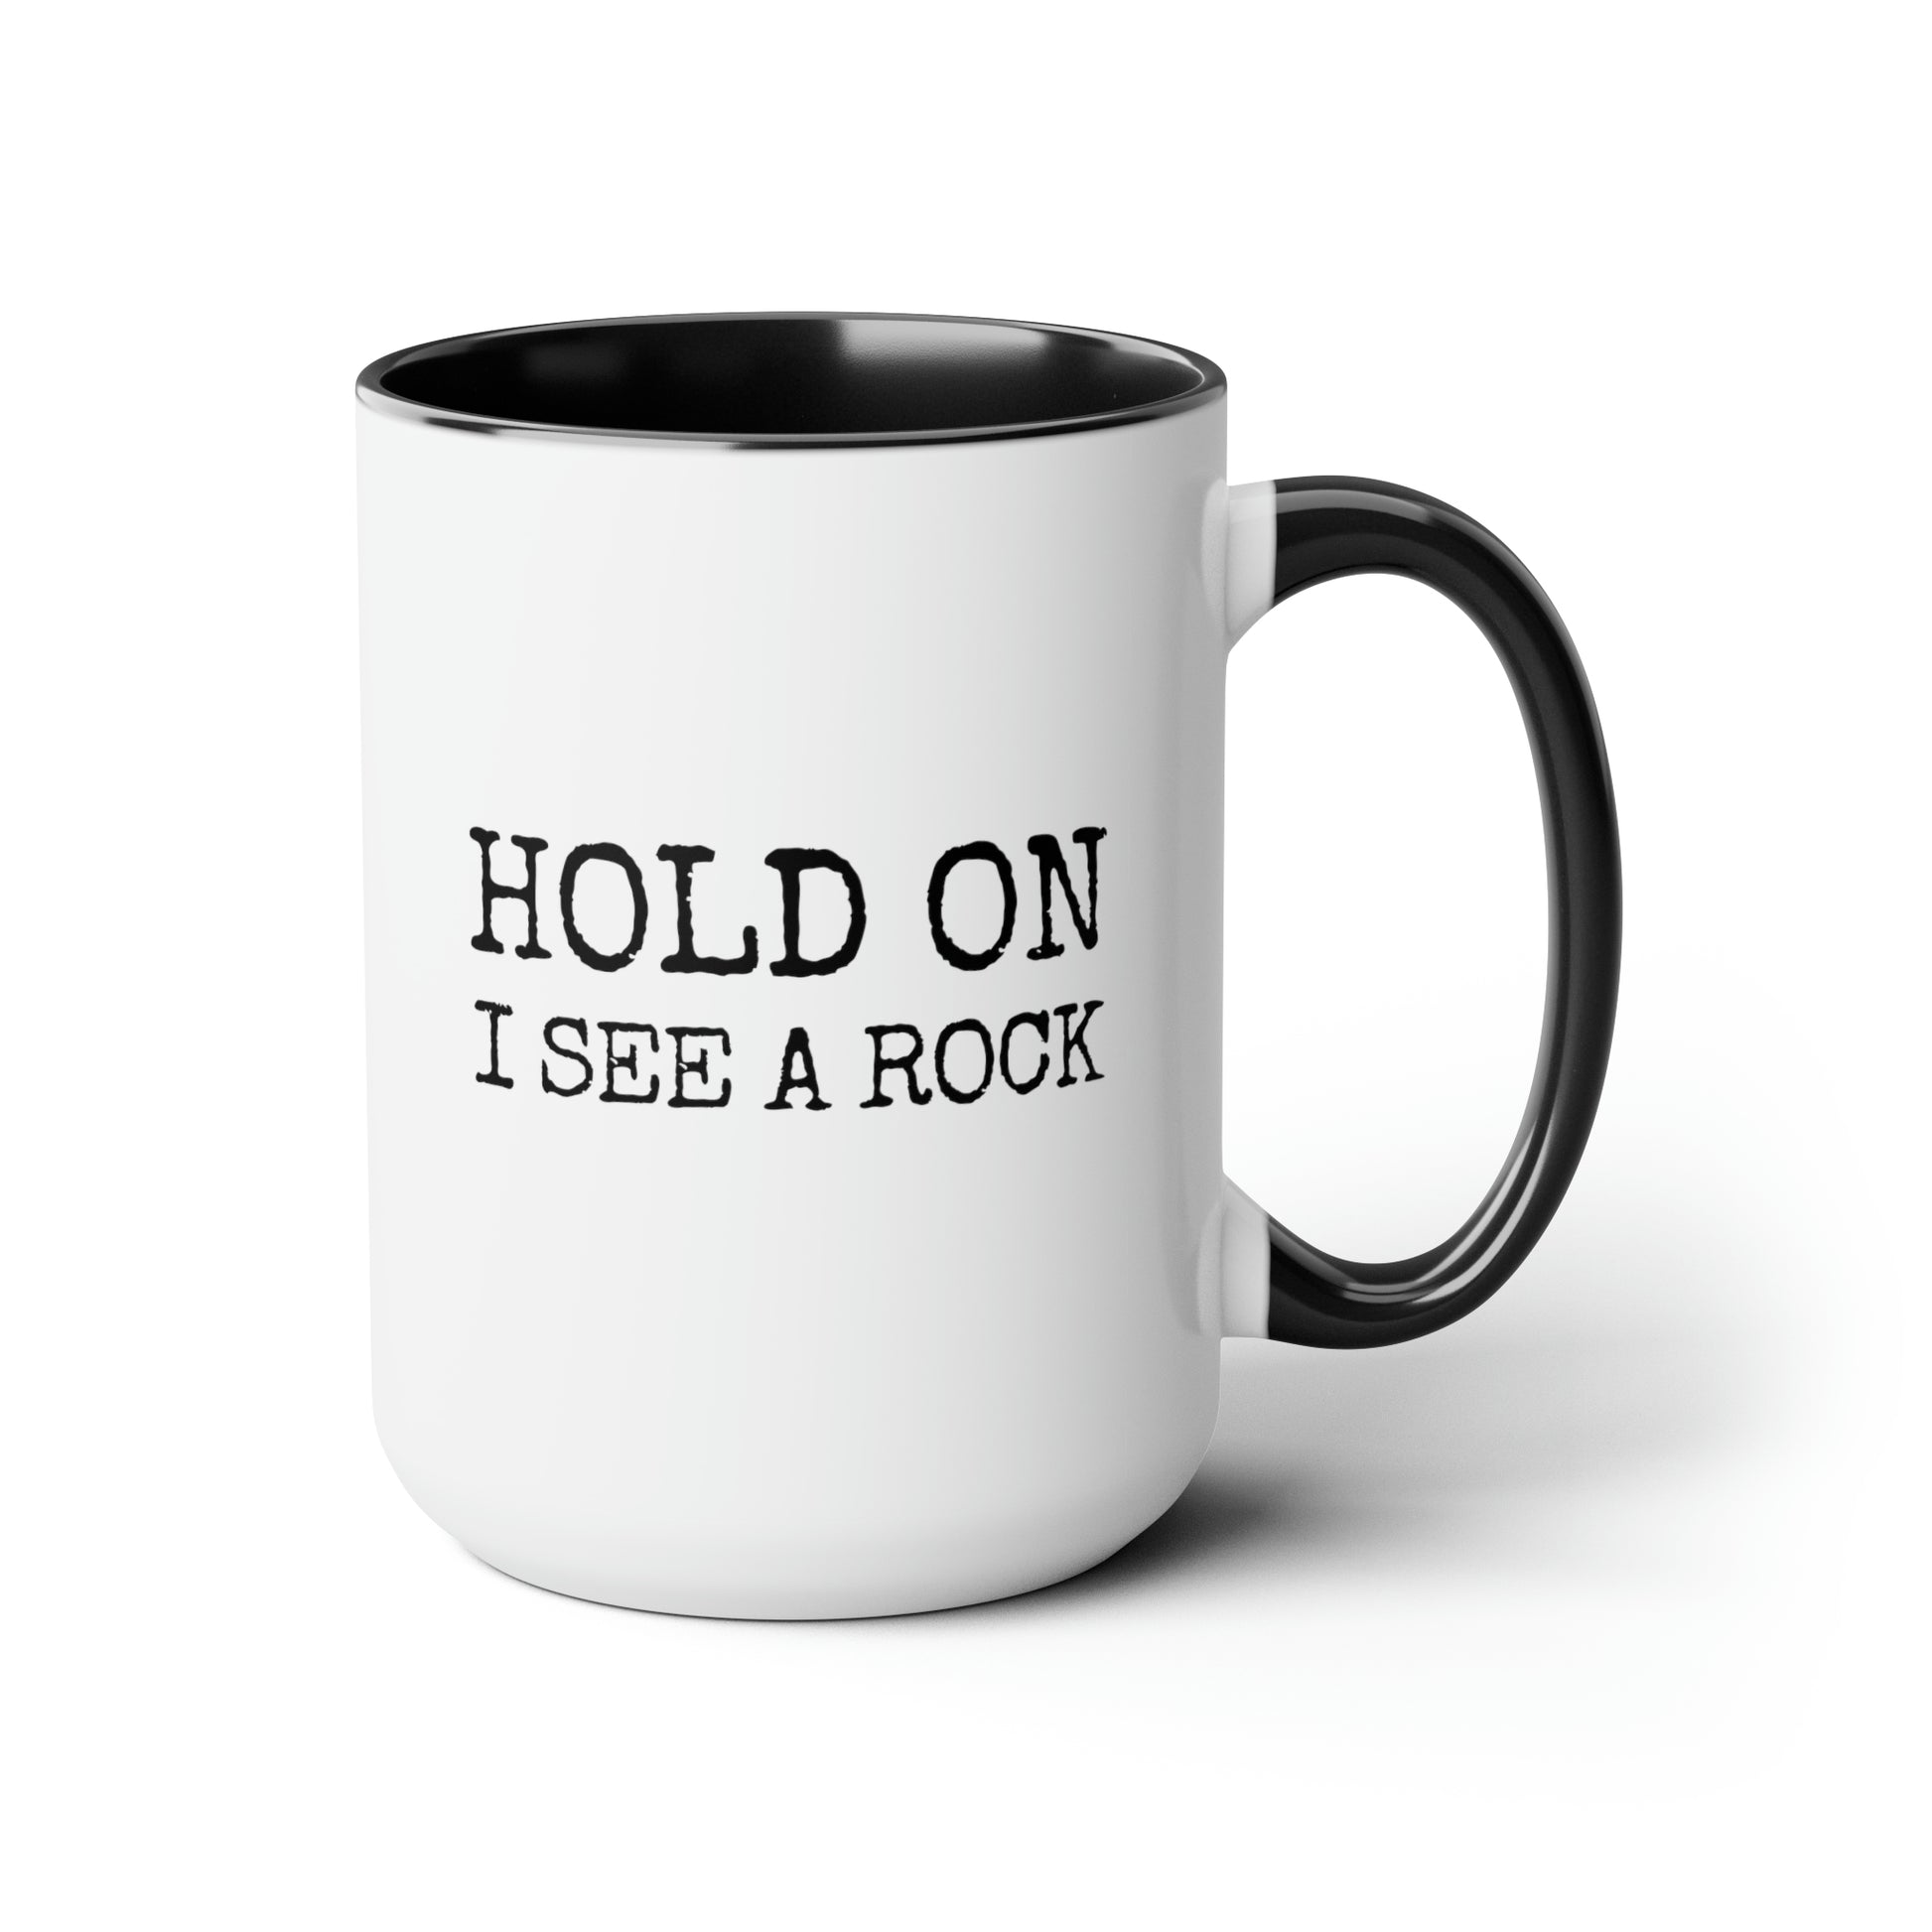 Hold On I See A Rock 15oz white with black accent funny large coffee mug gift for geologist science rock lover geology teacher collector rockhound stone waveywares wavey wares wavywares wavy wares